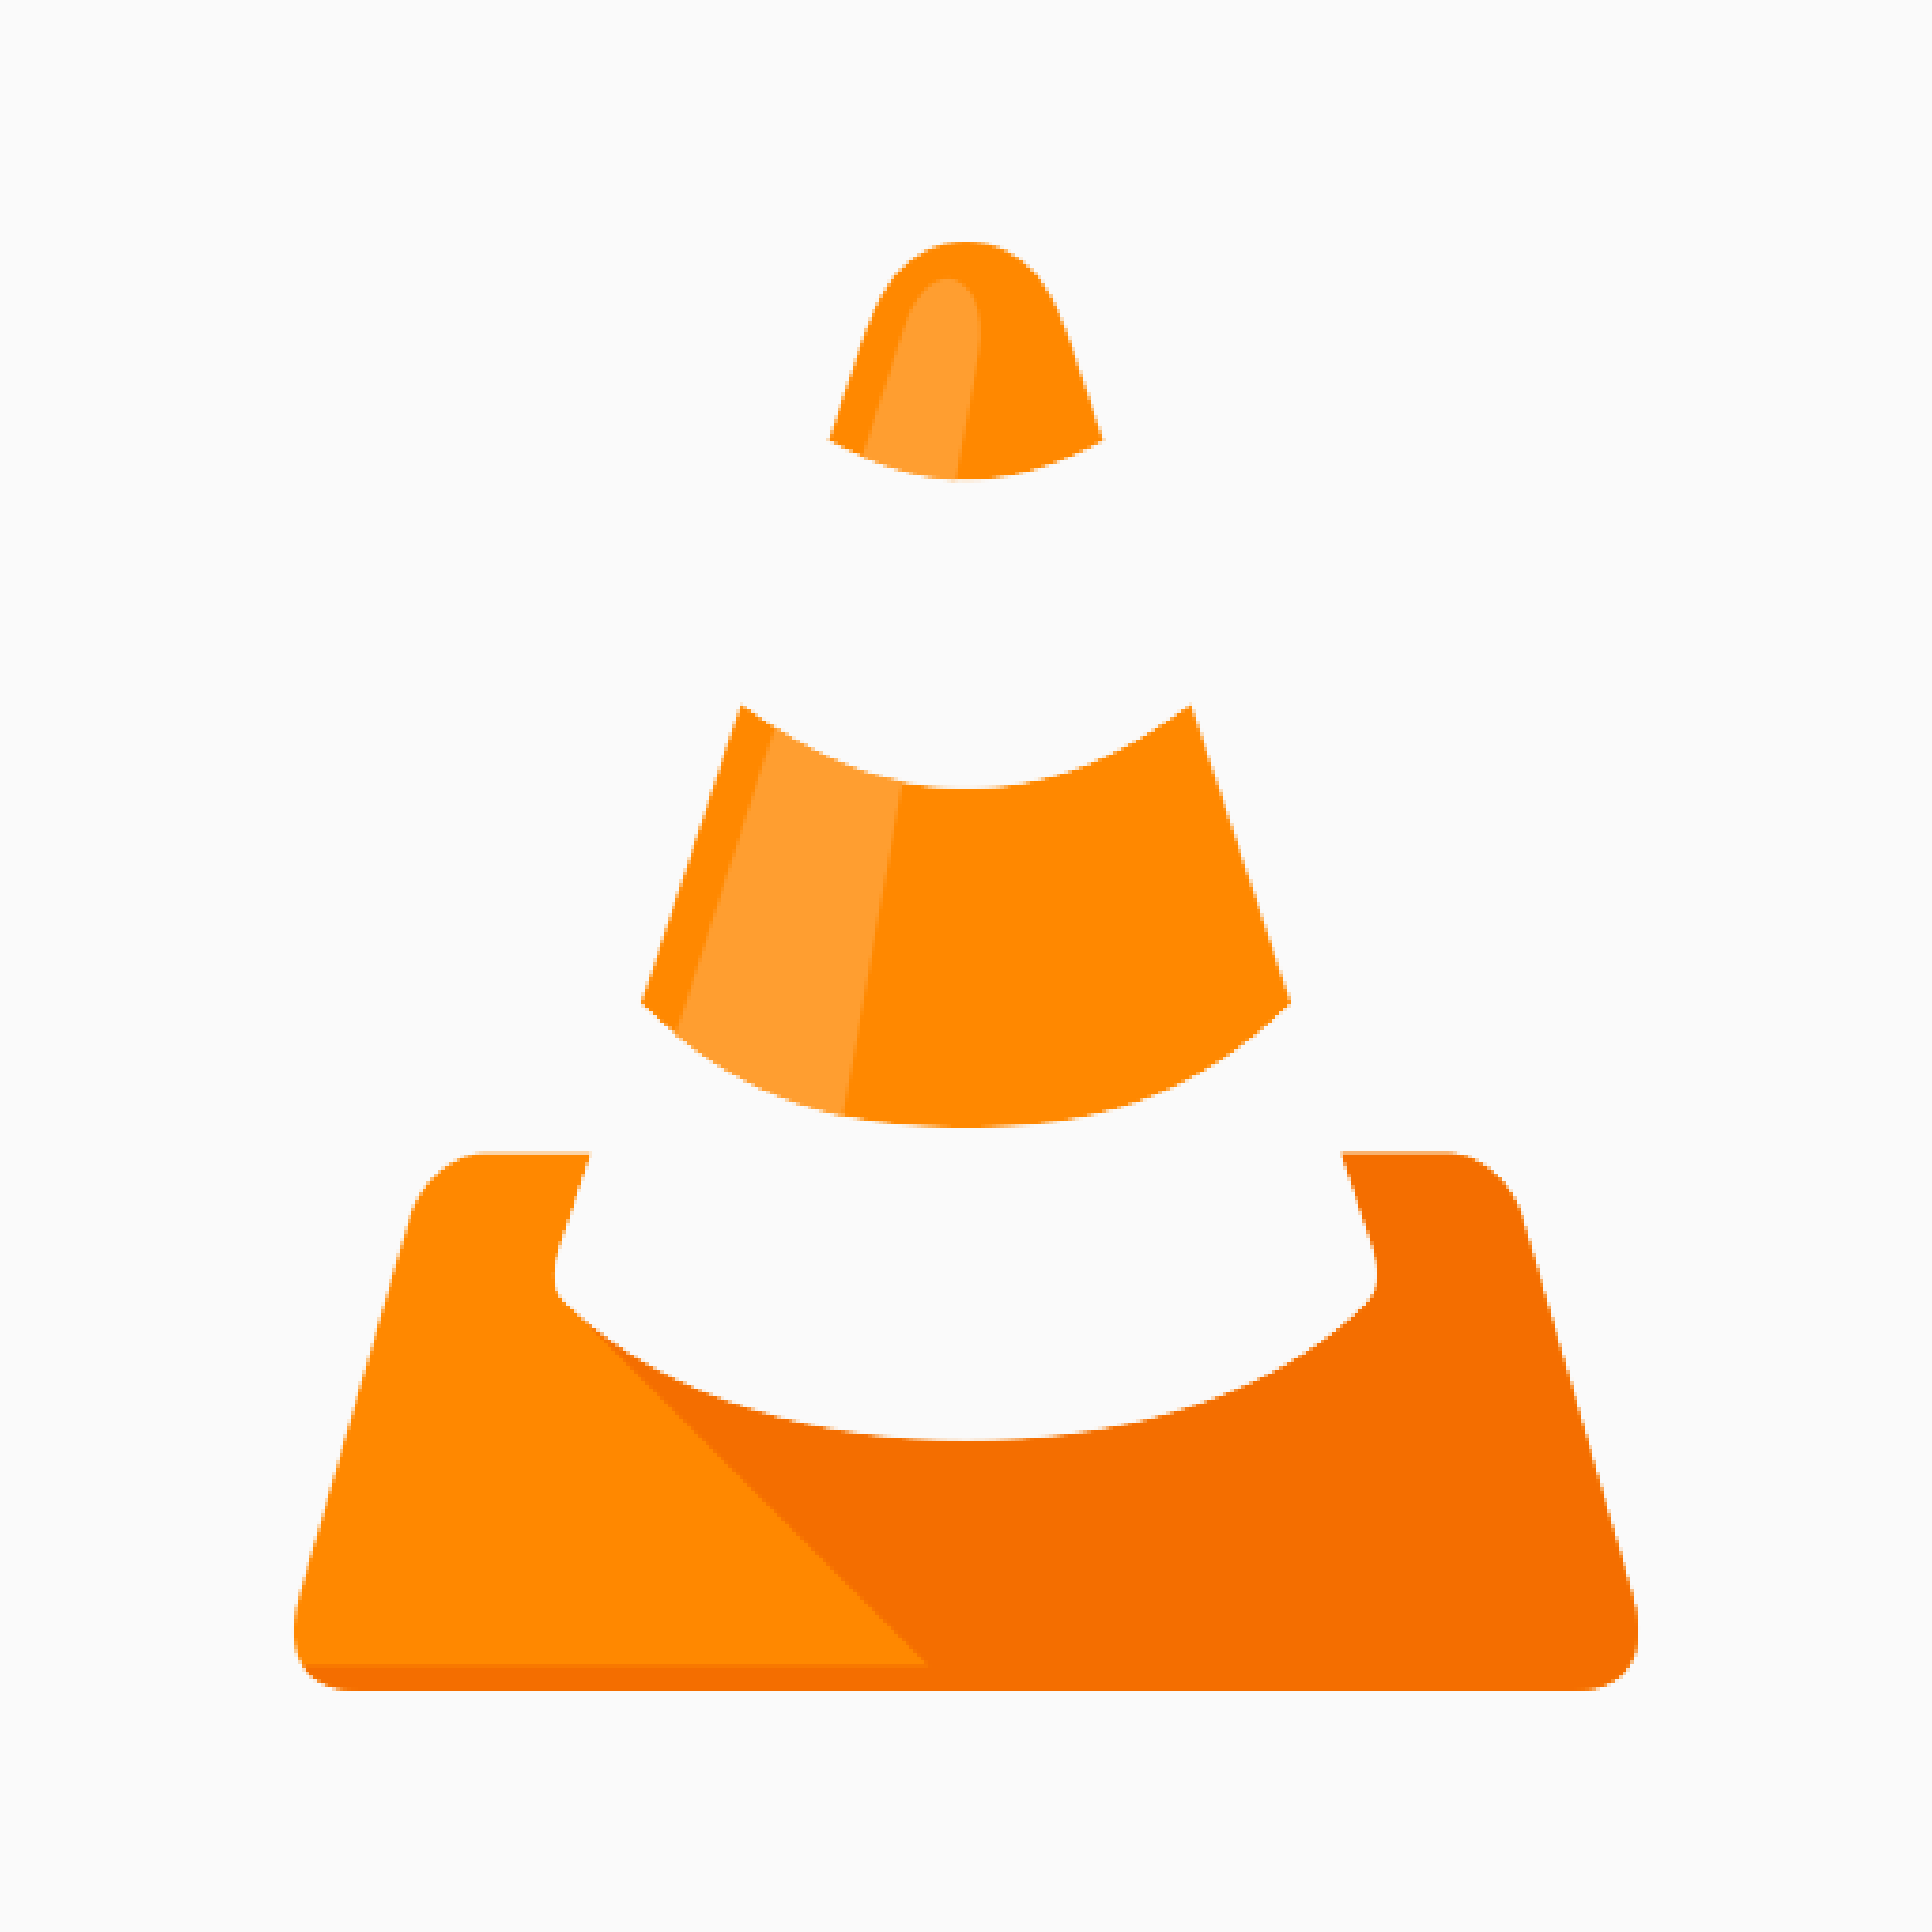 vlc for mac 10.8.2